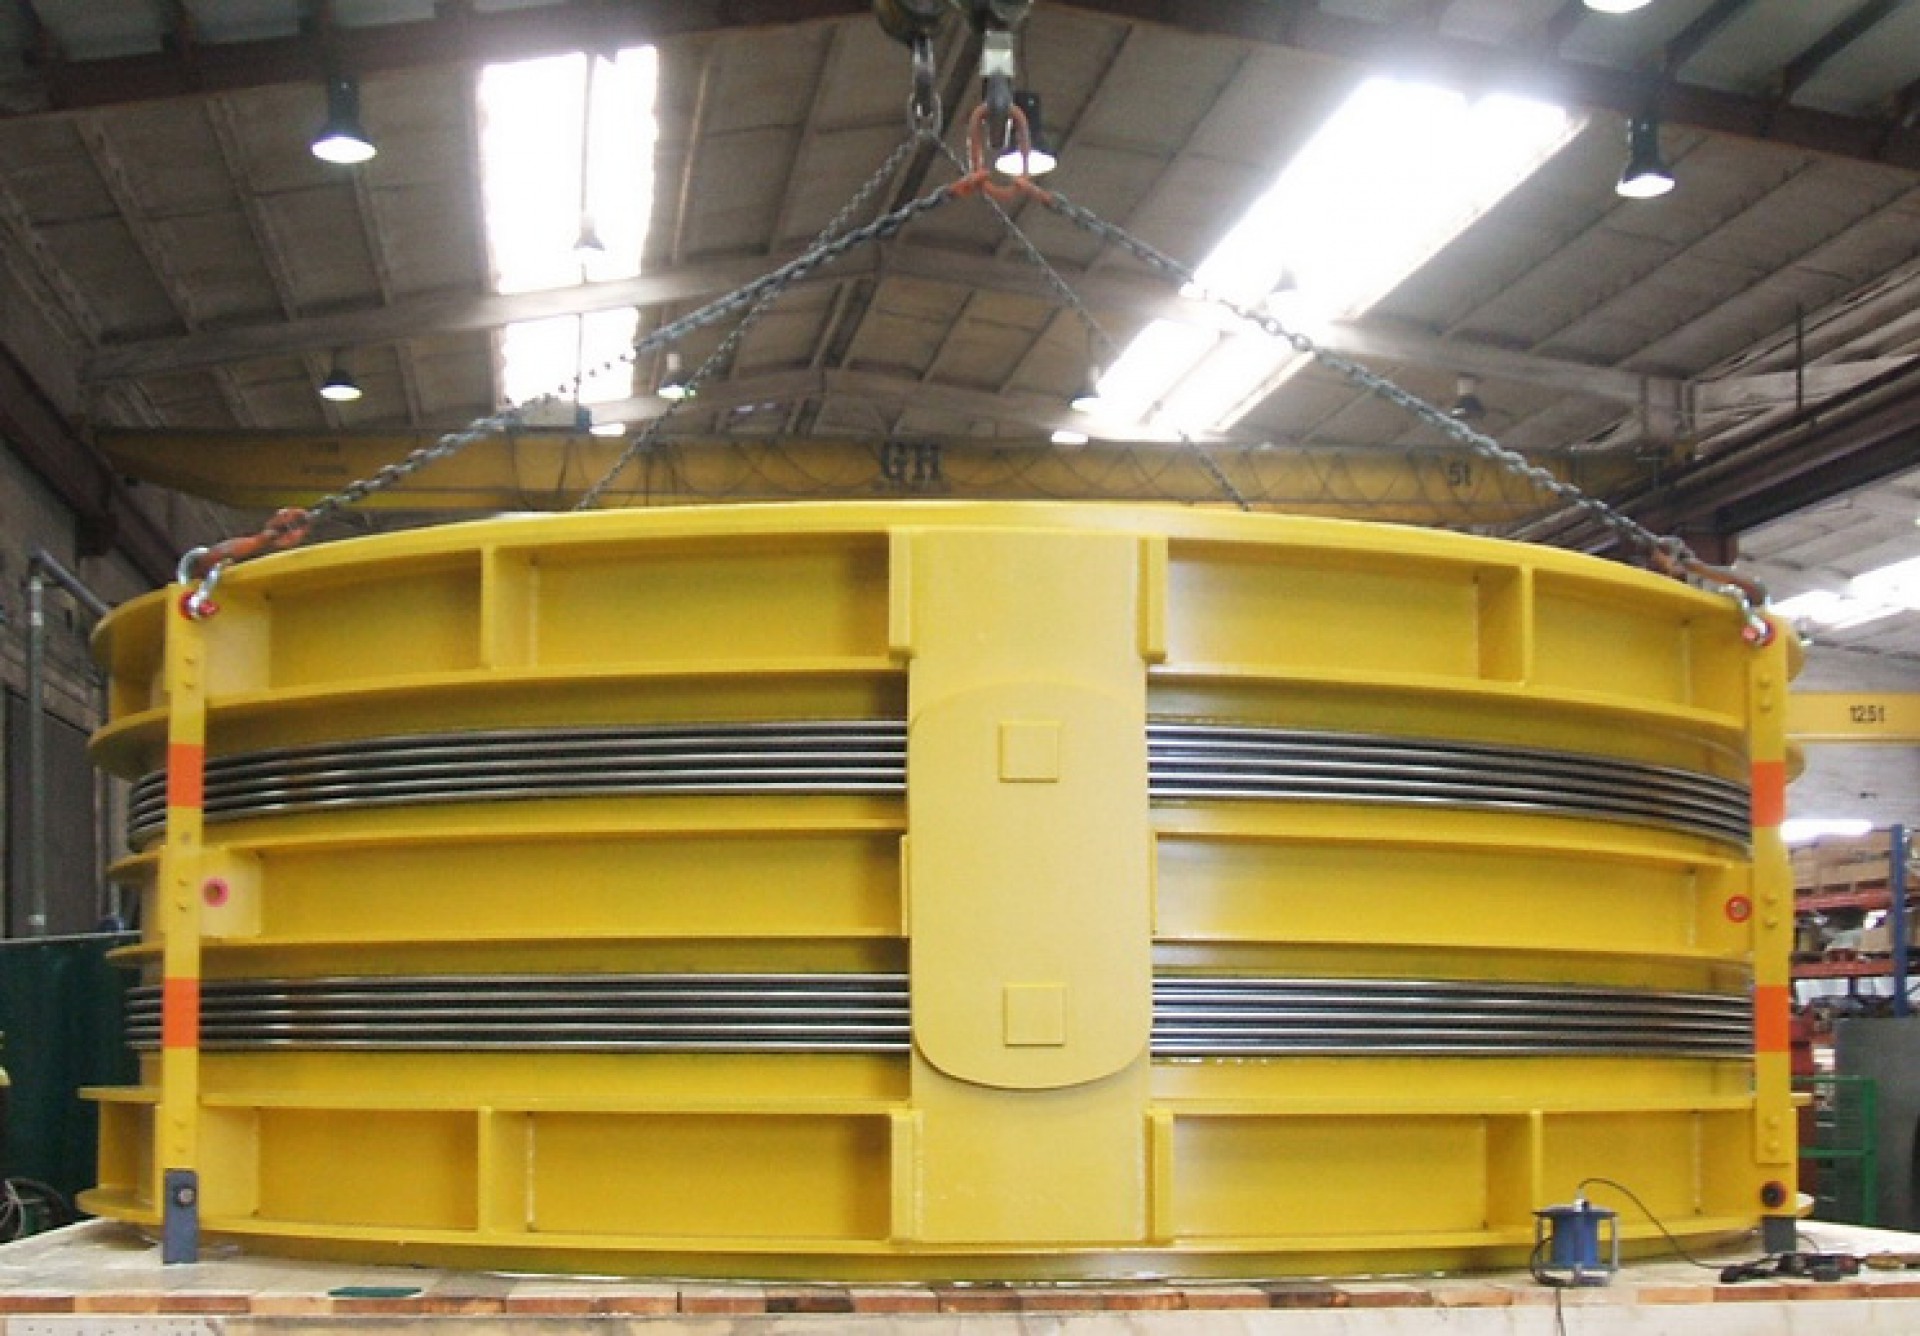 Double Hinged DN 5500 for SIEMENS E-Turbines, Severn Power, UK